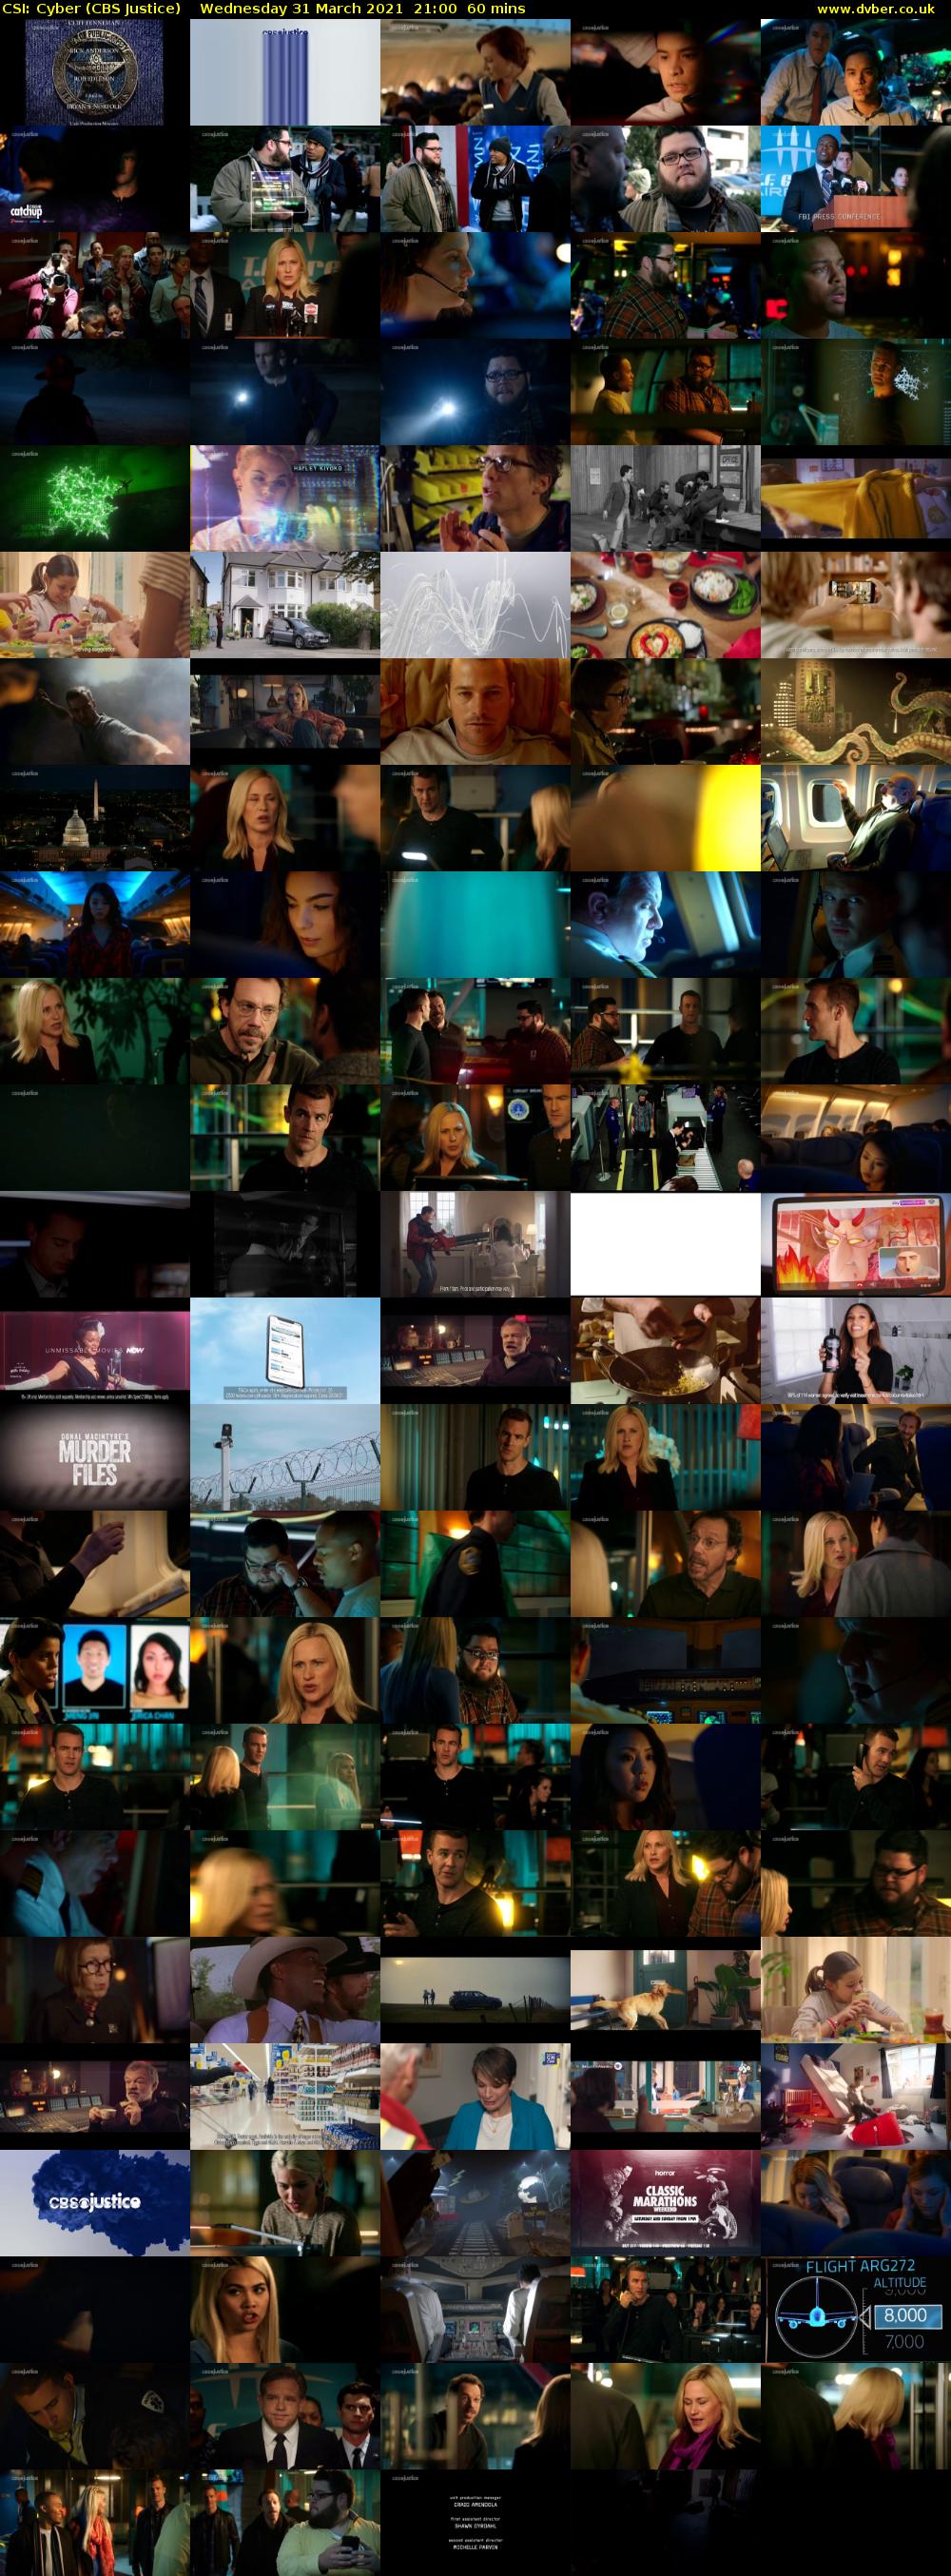 CSI: Cyber (CBS Justice) Wednesday 31 March 2021 21:00 - 22:00